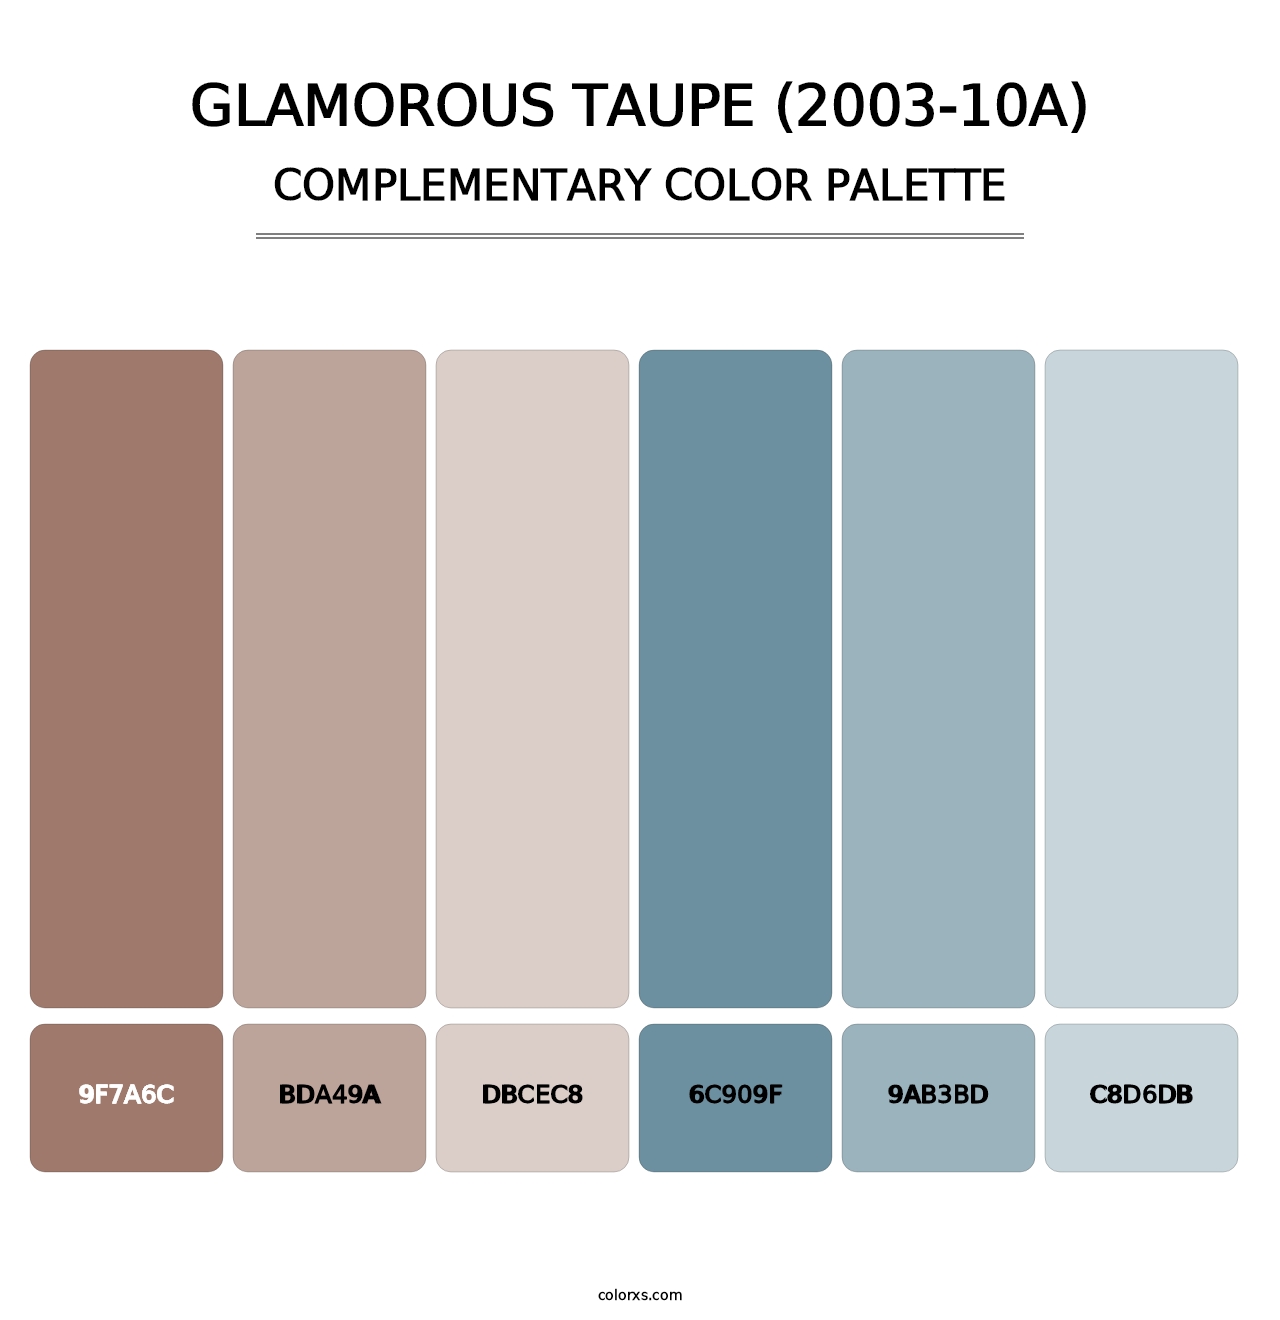 Glamorous Taupe (2003-10A) - Complementary Color Palette